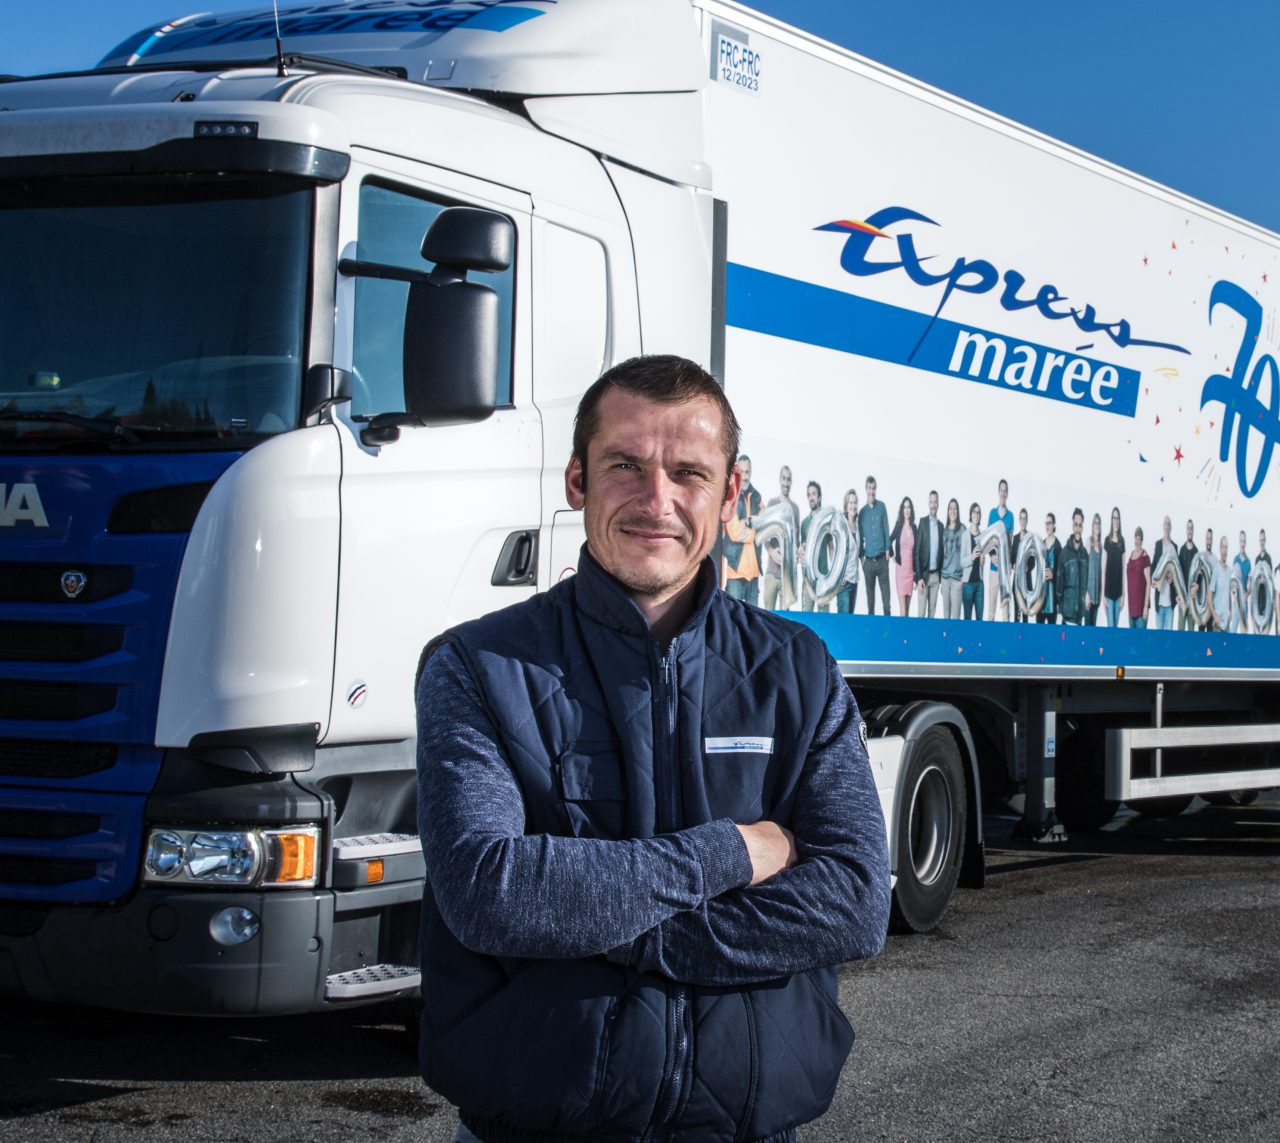 Technical Manager Philippe Barbier from the company Express Marée, France.